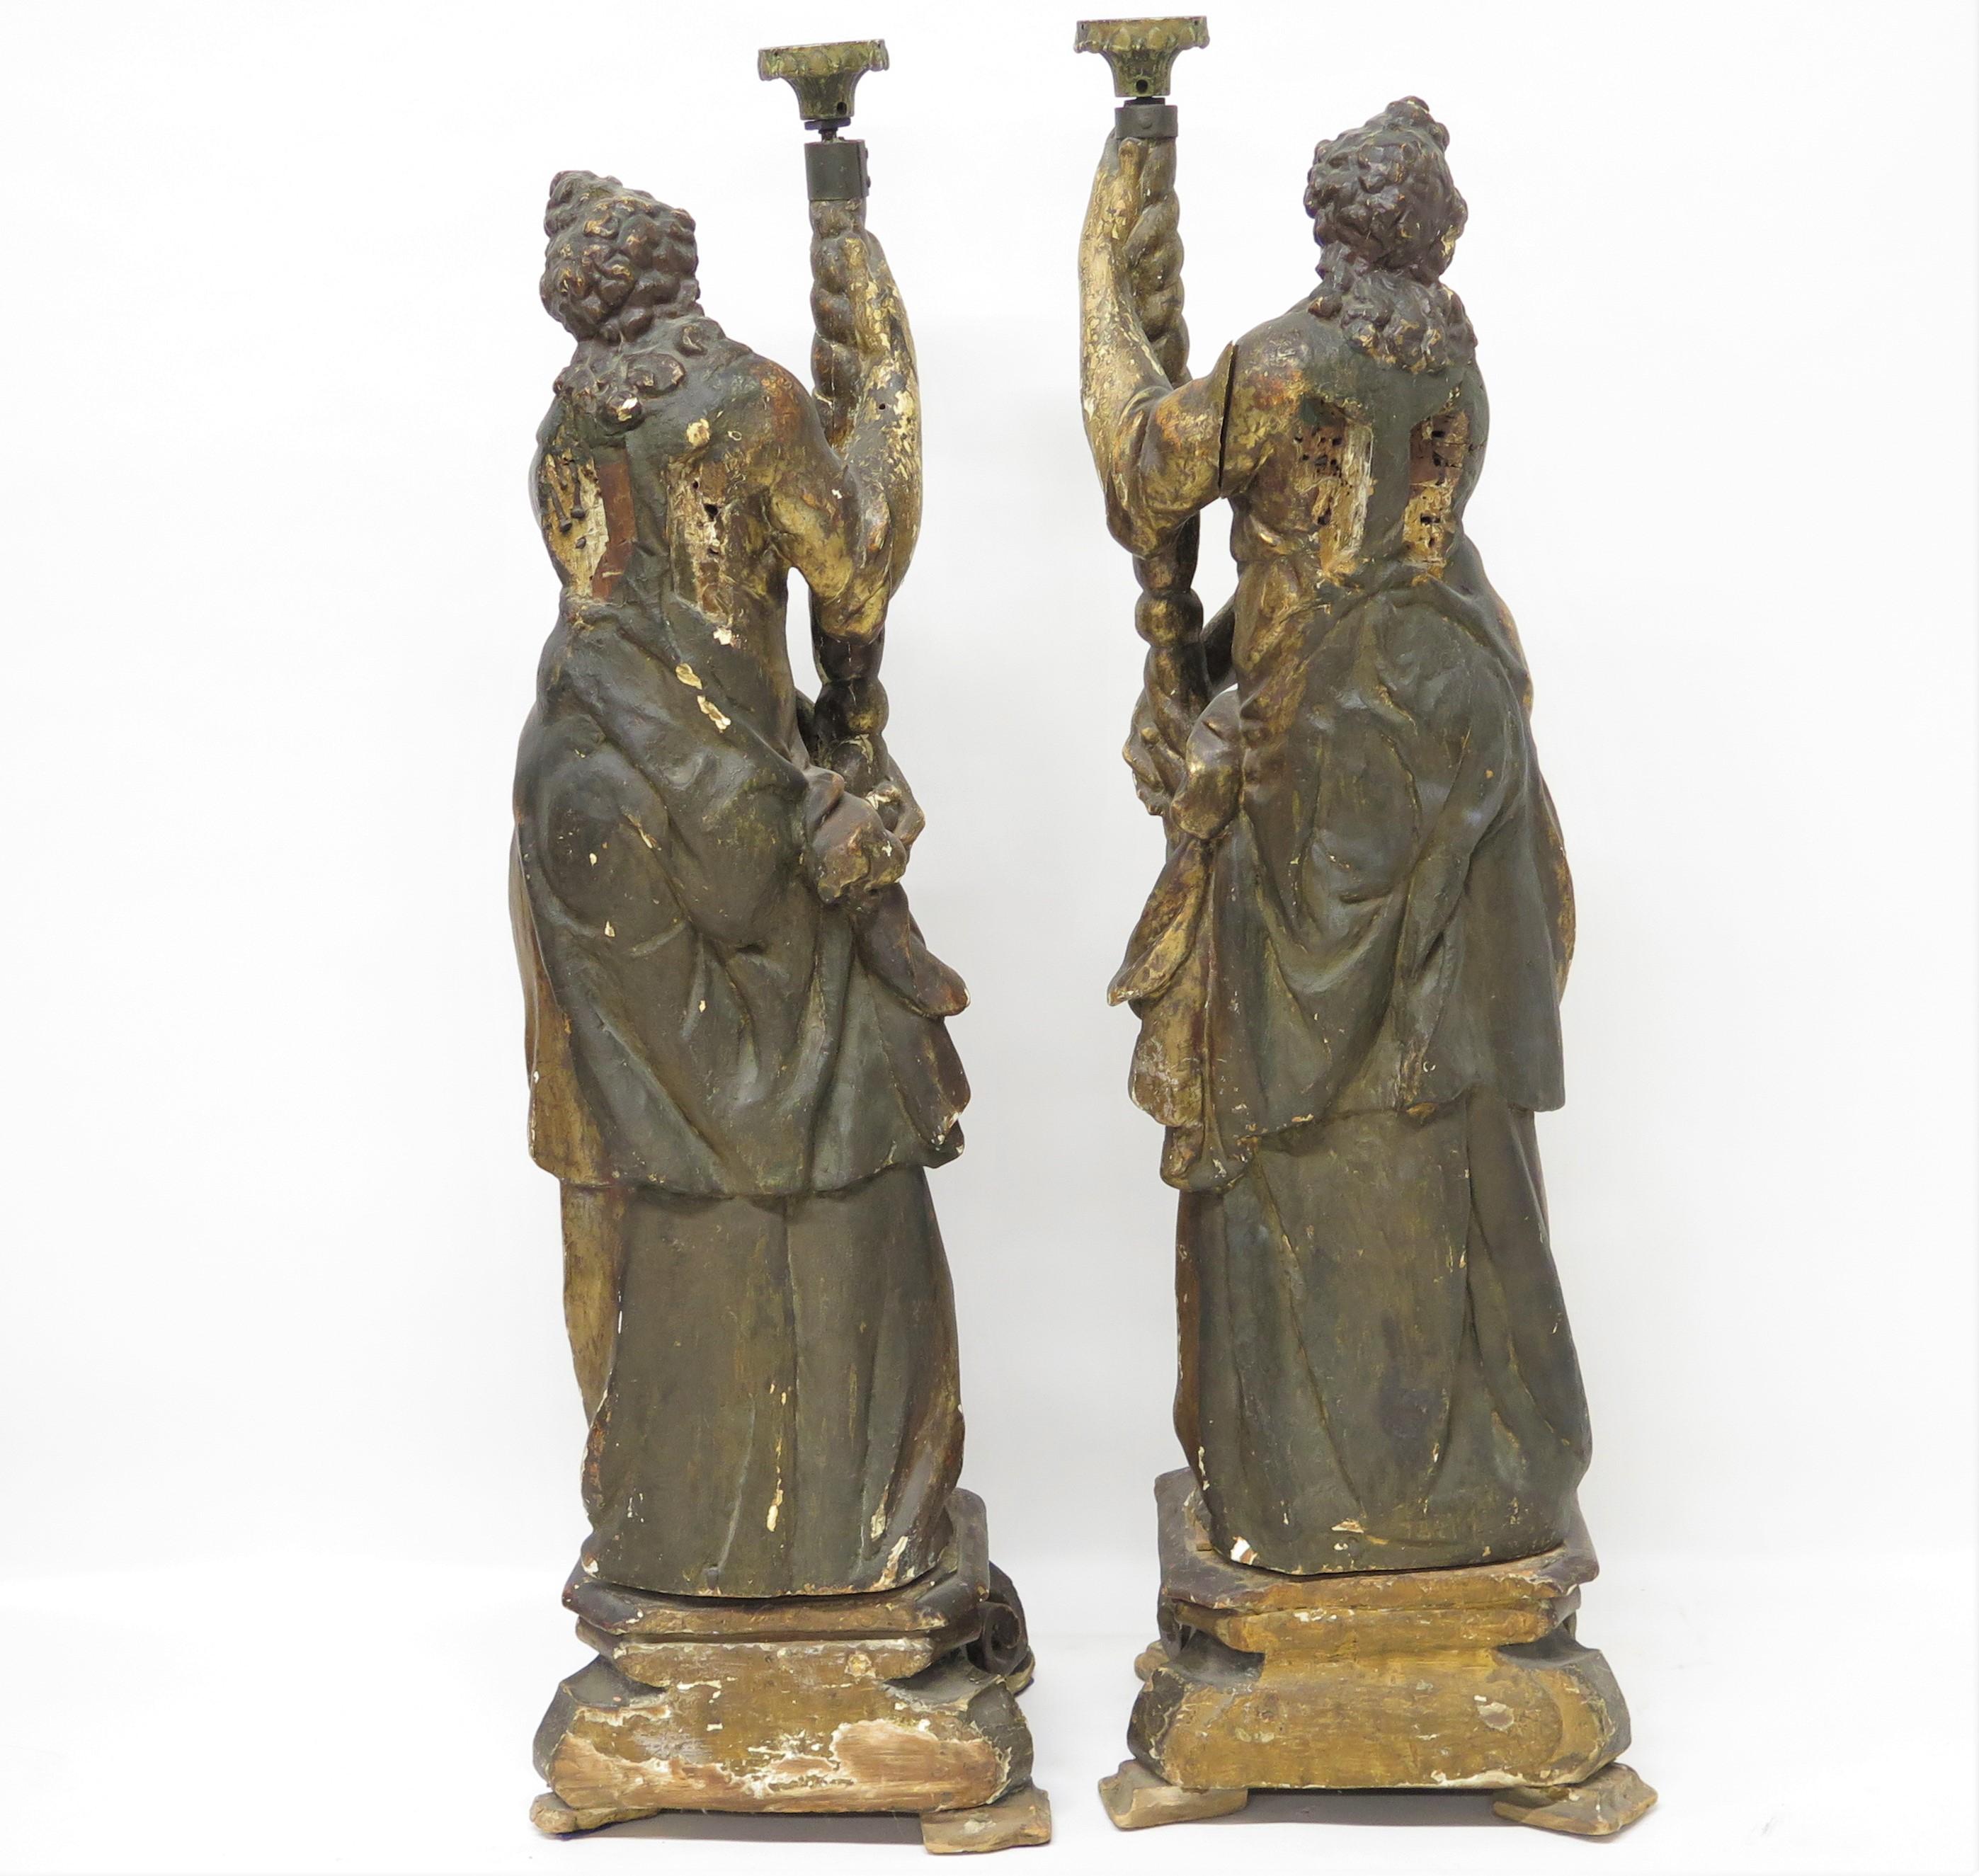 a large scale pair of Italian polychromed, carved and gilded figural candlesticks in the form of angels, Italy. 18th century